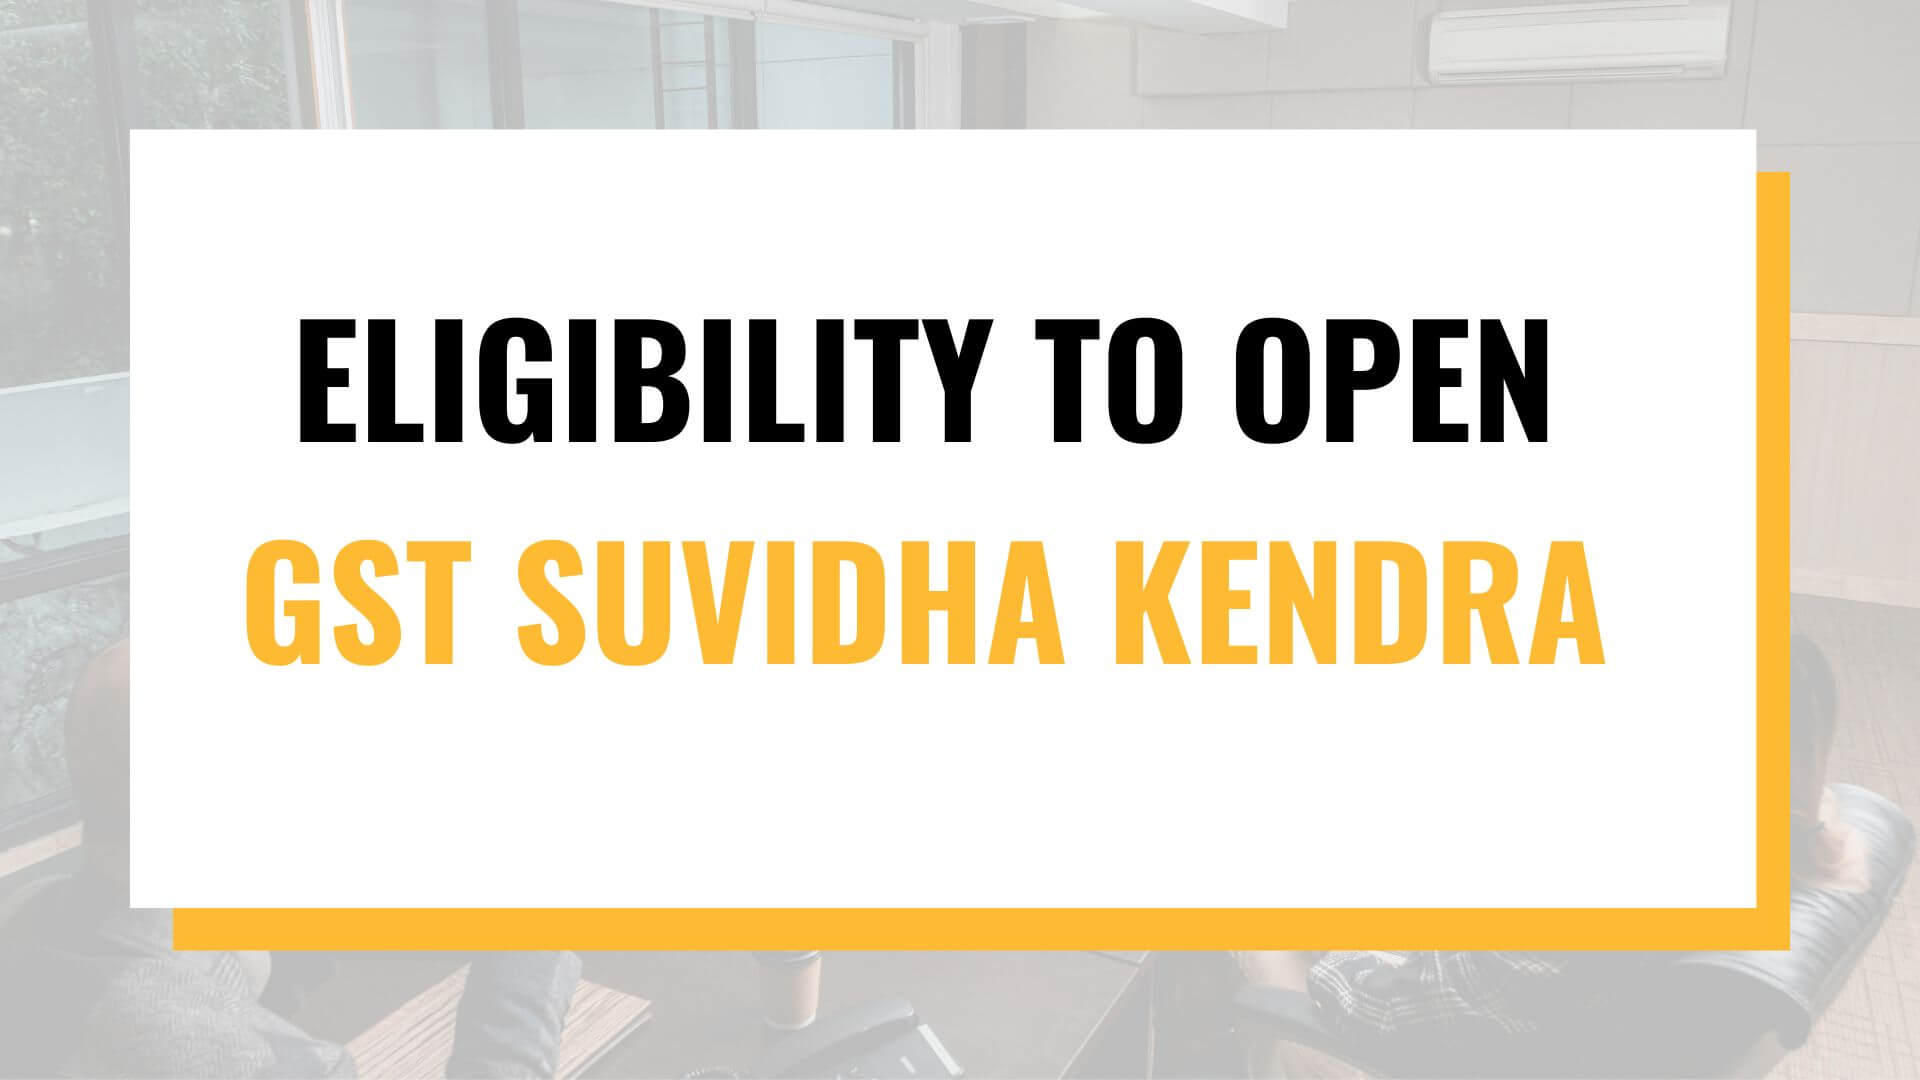 Eligibility to Open GST suvidha kendra